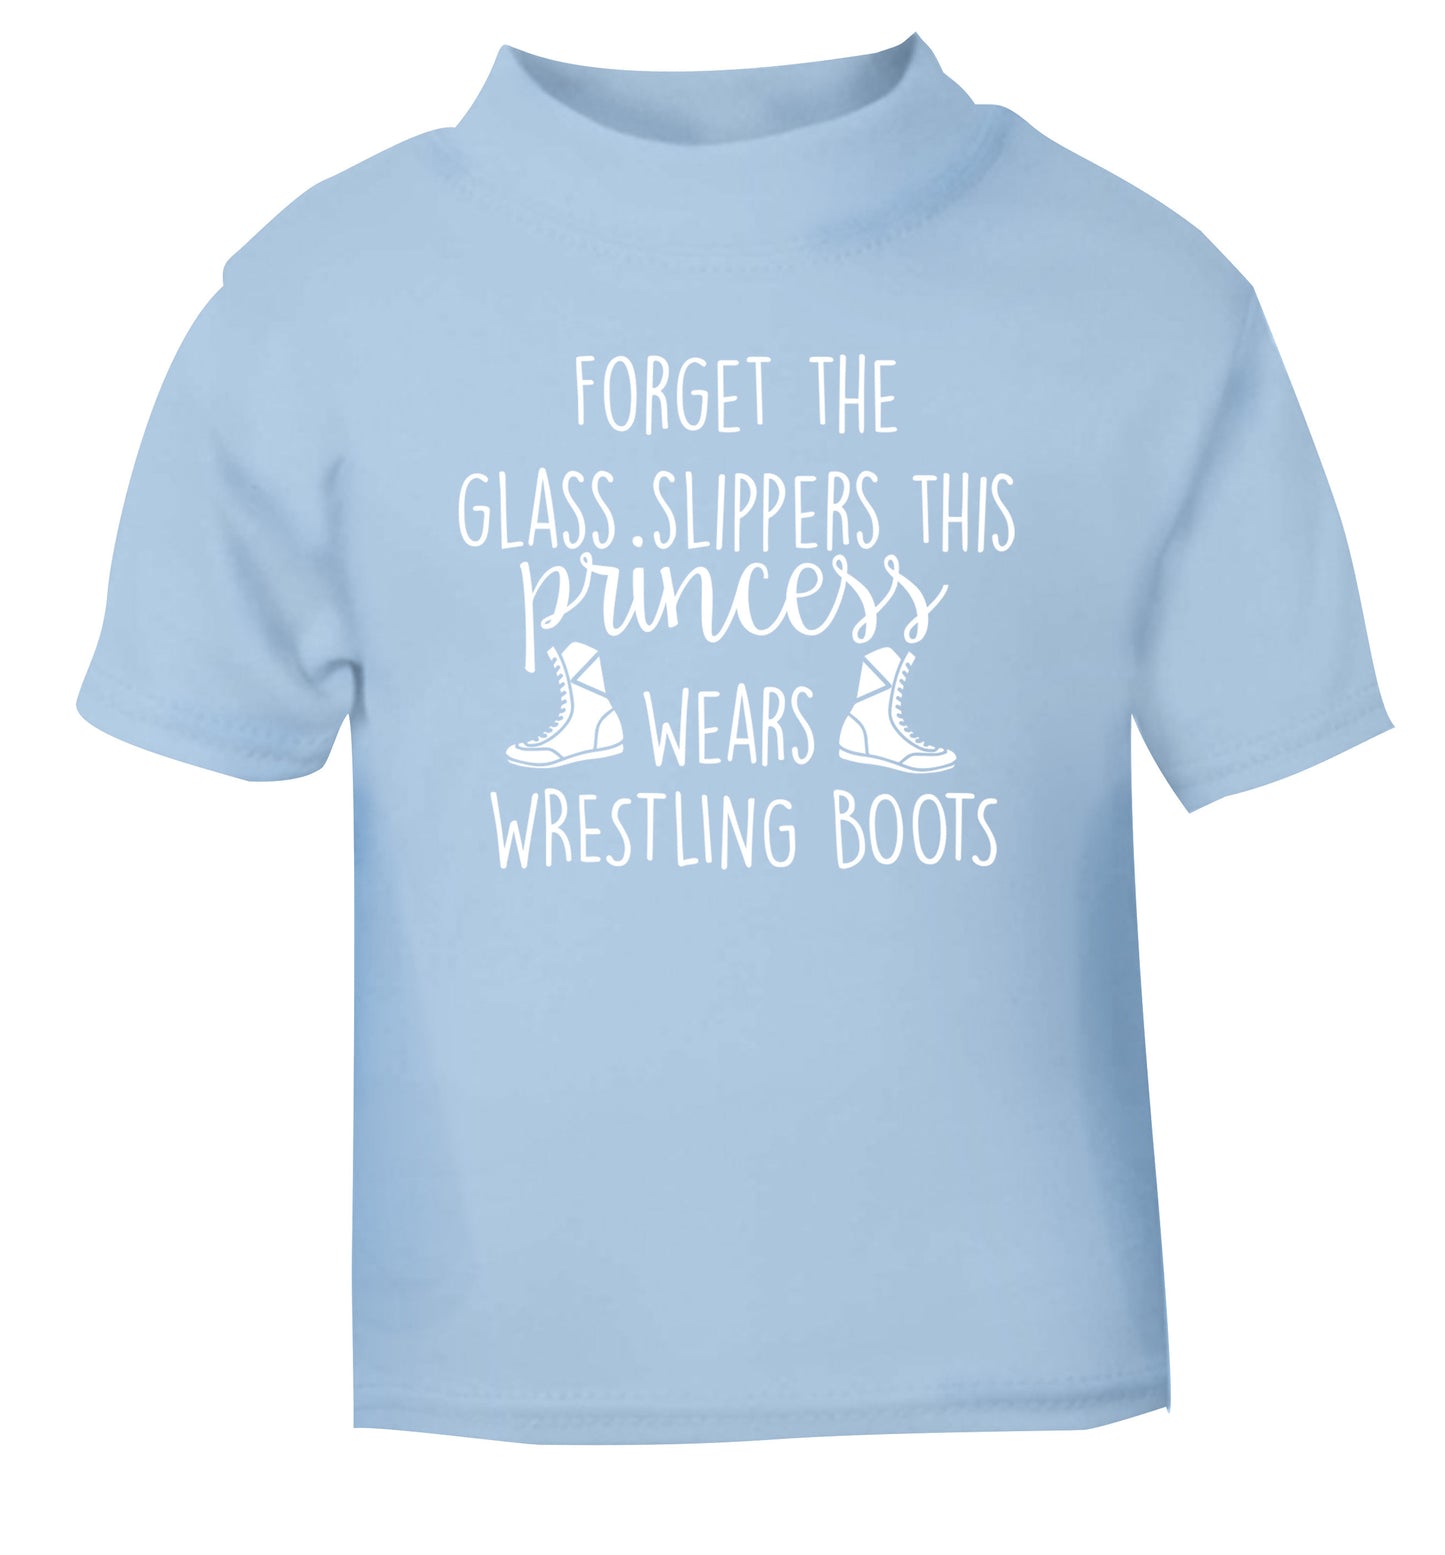 Forget the glass slippers this princess wears wrestling boots light blue Baby Toddler Tshirt 2 Years